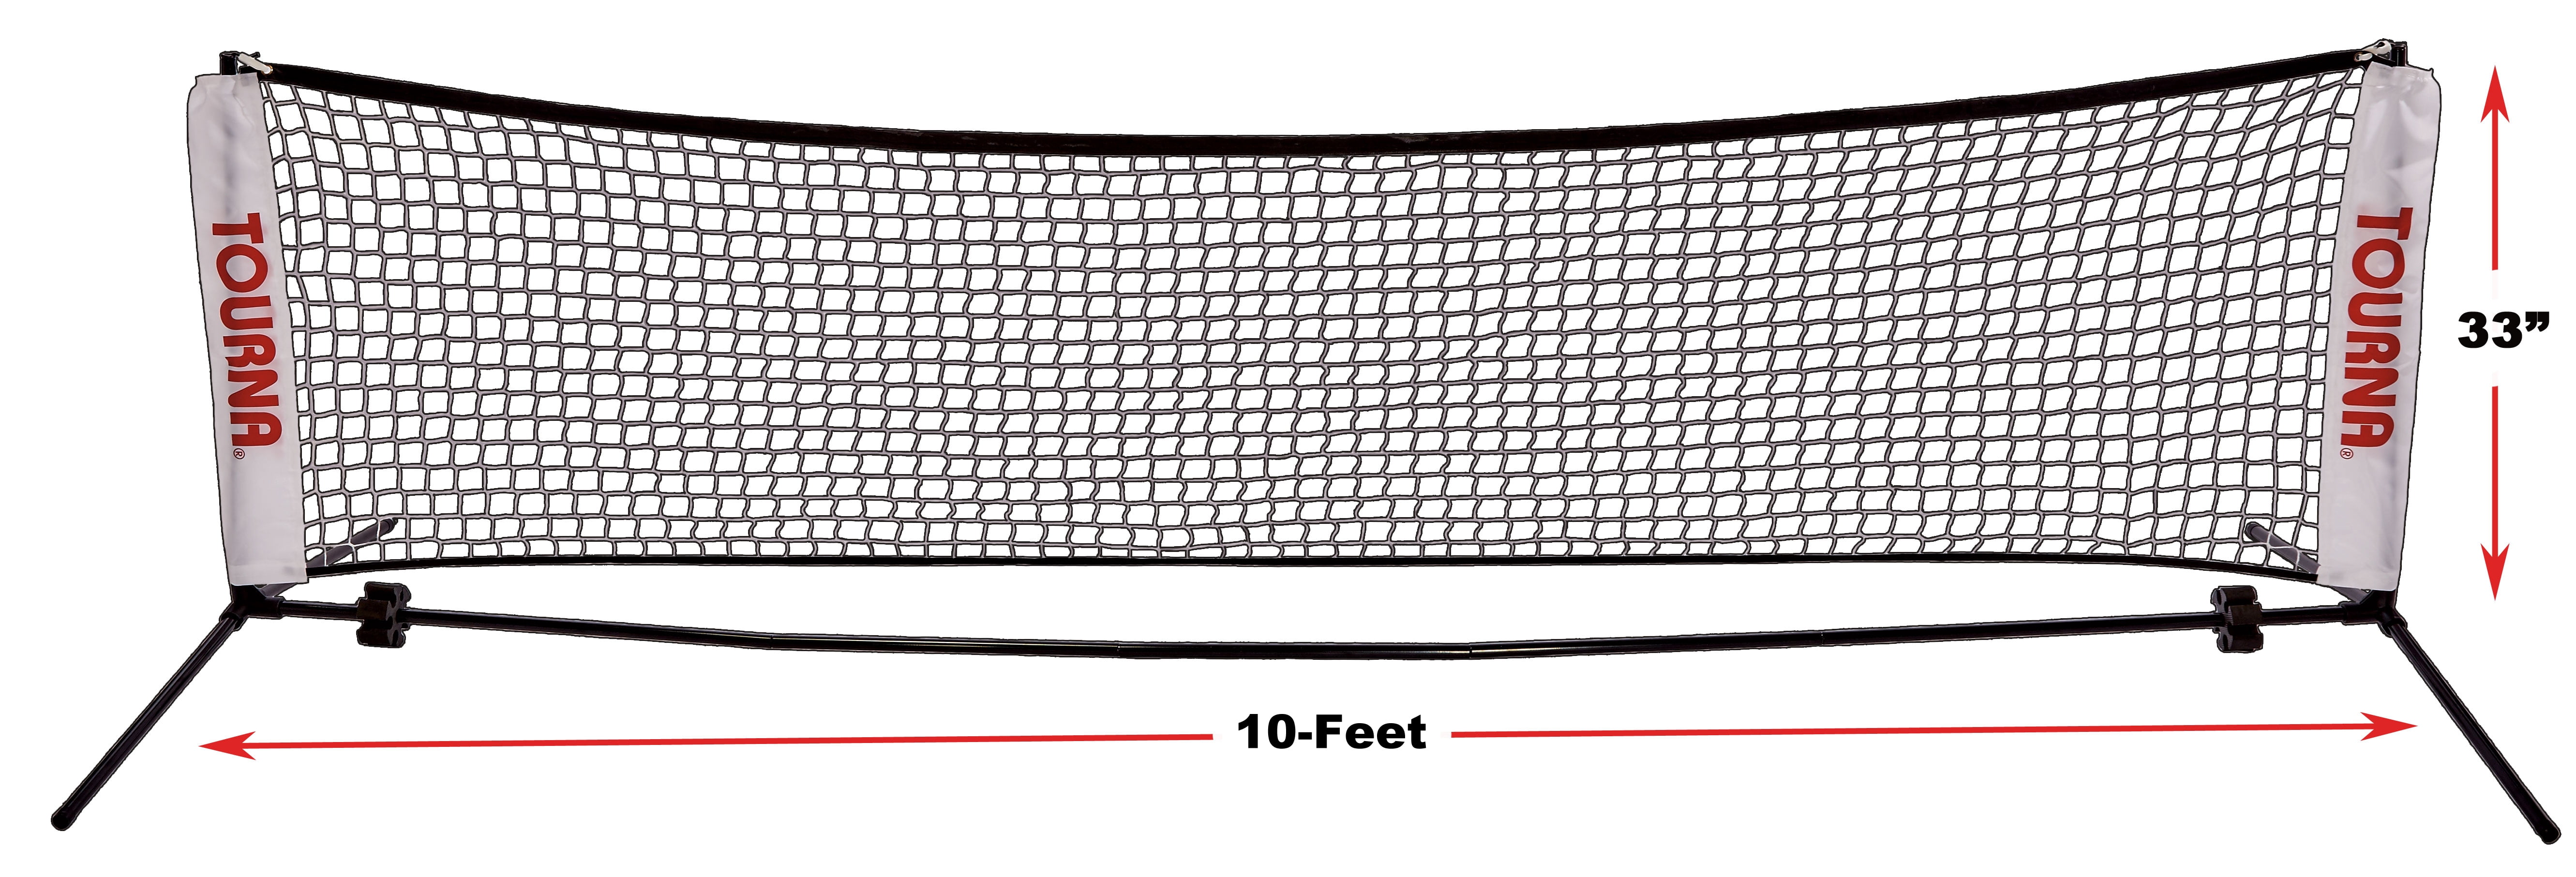 Tourna 10-Foot Portable Tennis Net for Youth Tennis